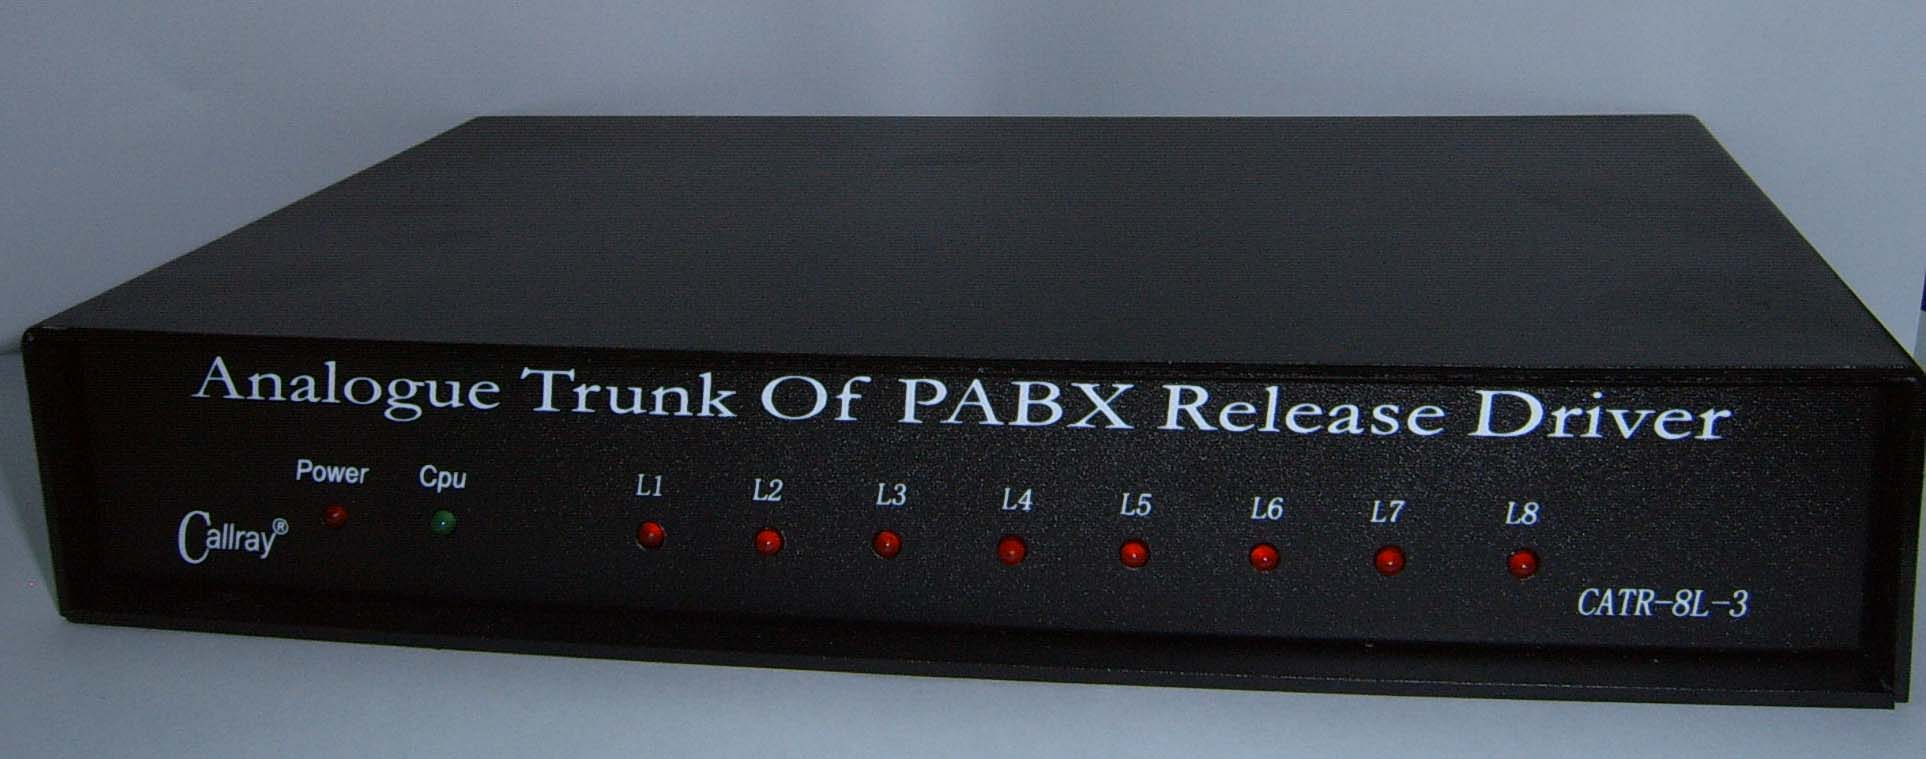 Analogue Trunk of PABX Release Driver